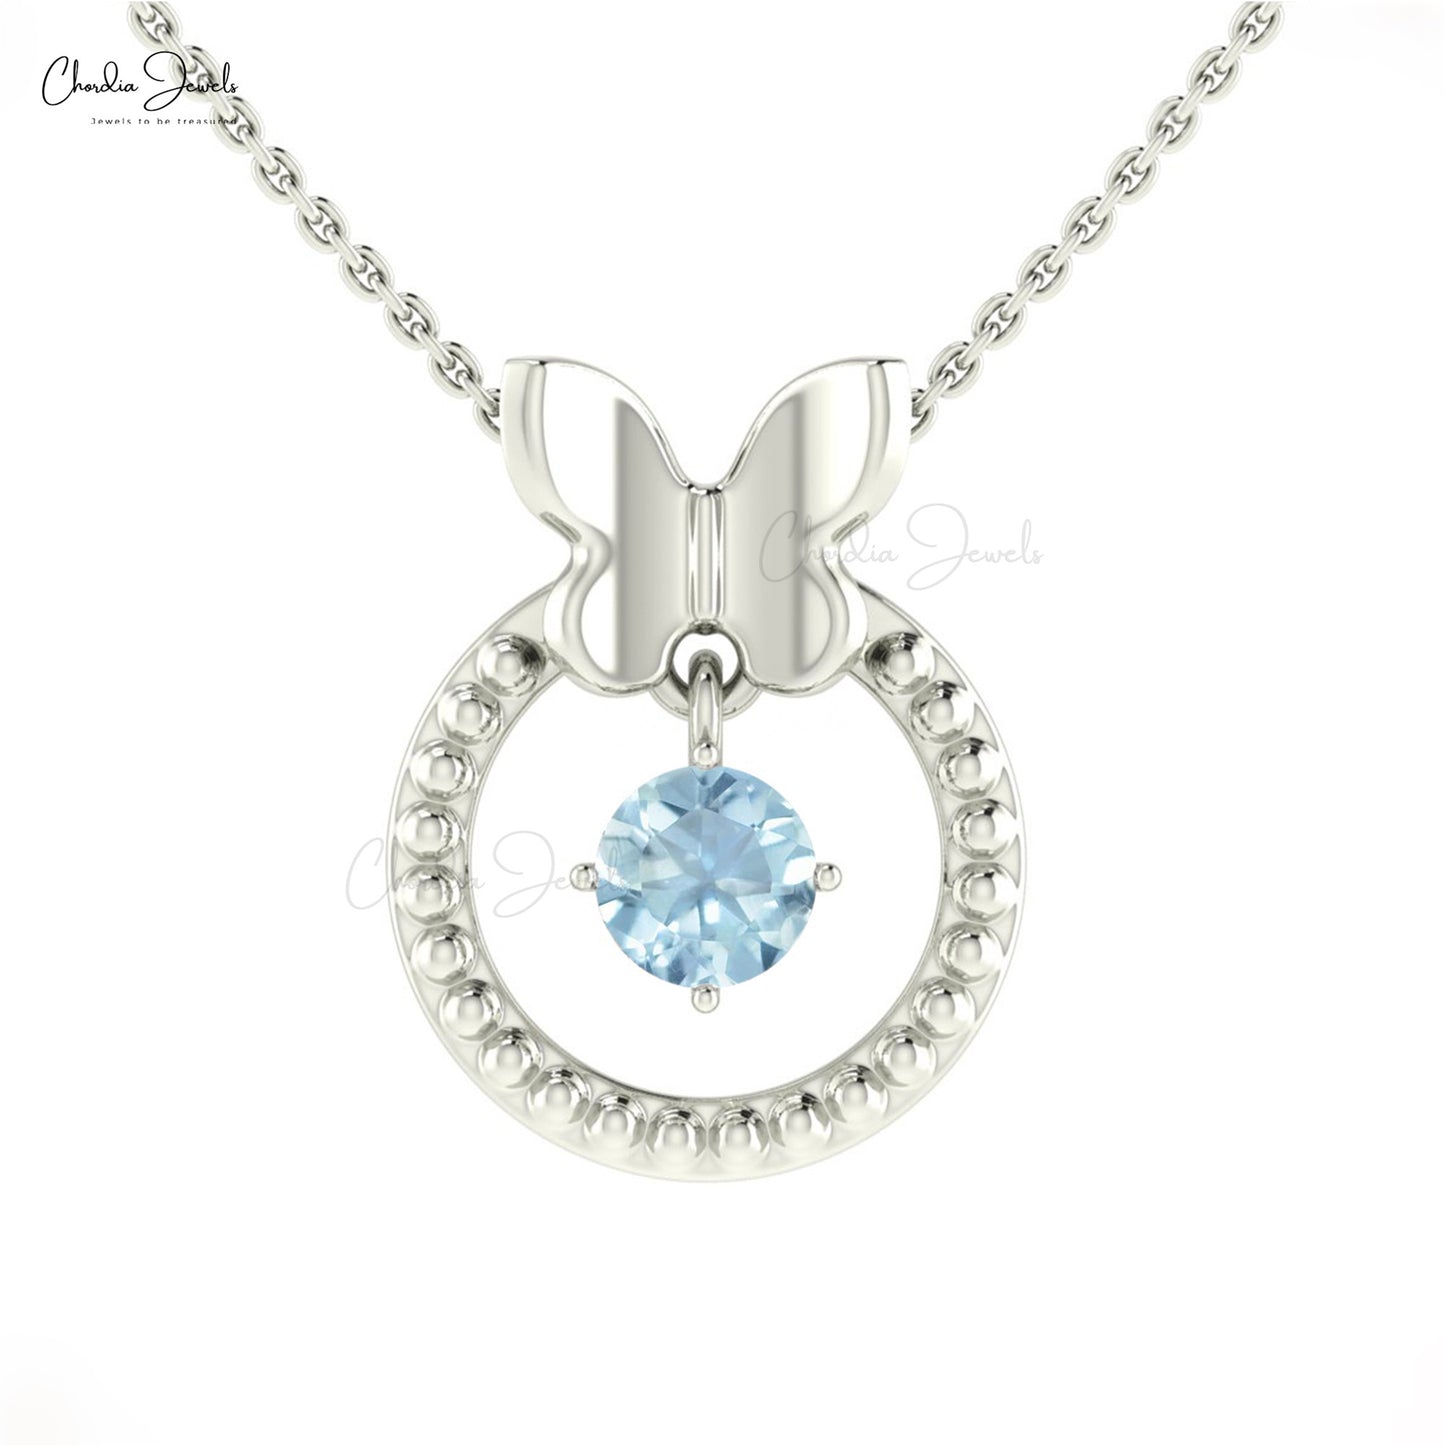 Load image into Gallery viewer, Aquamarine Solitaire Pendant
